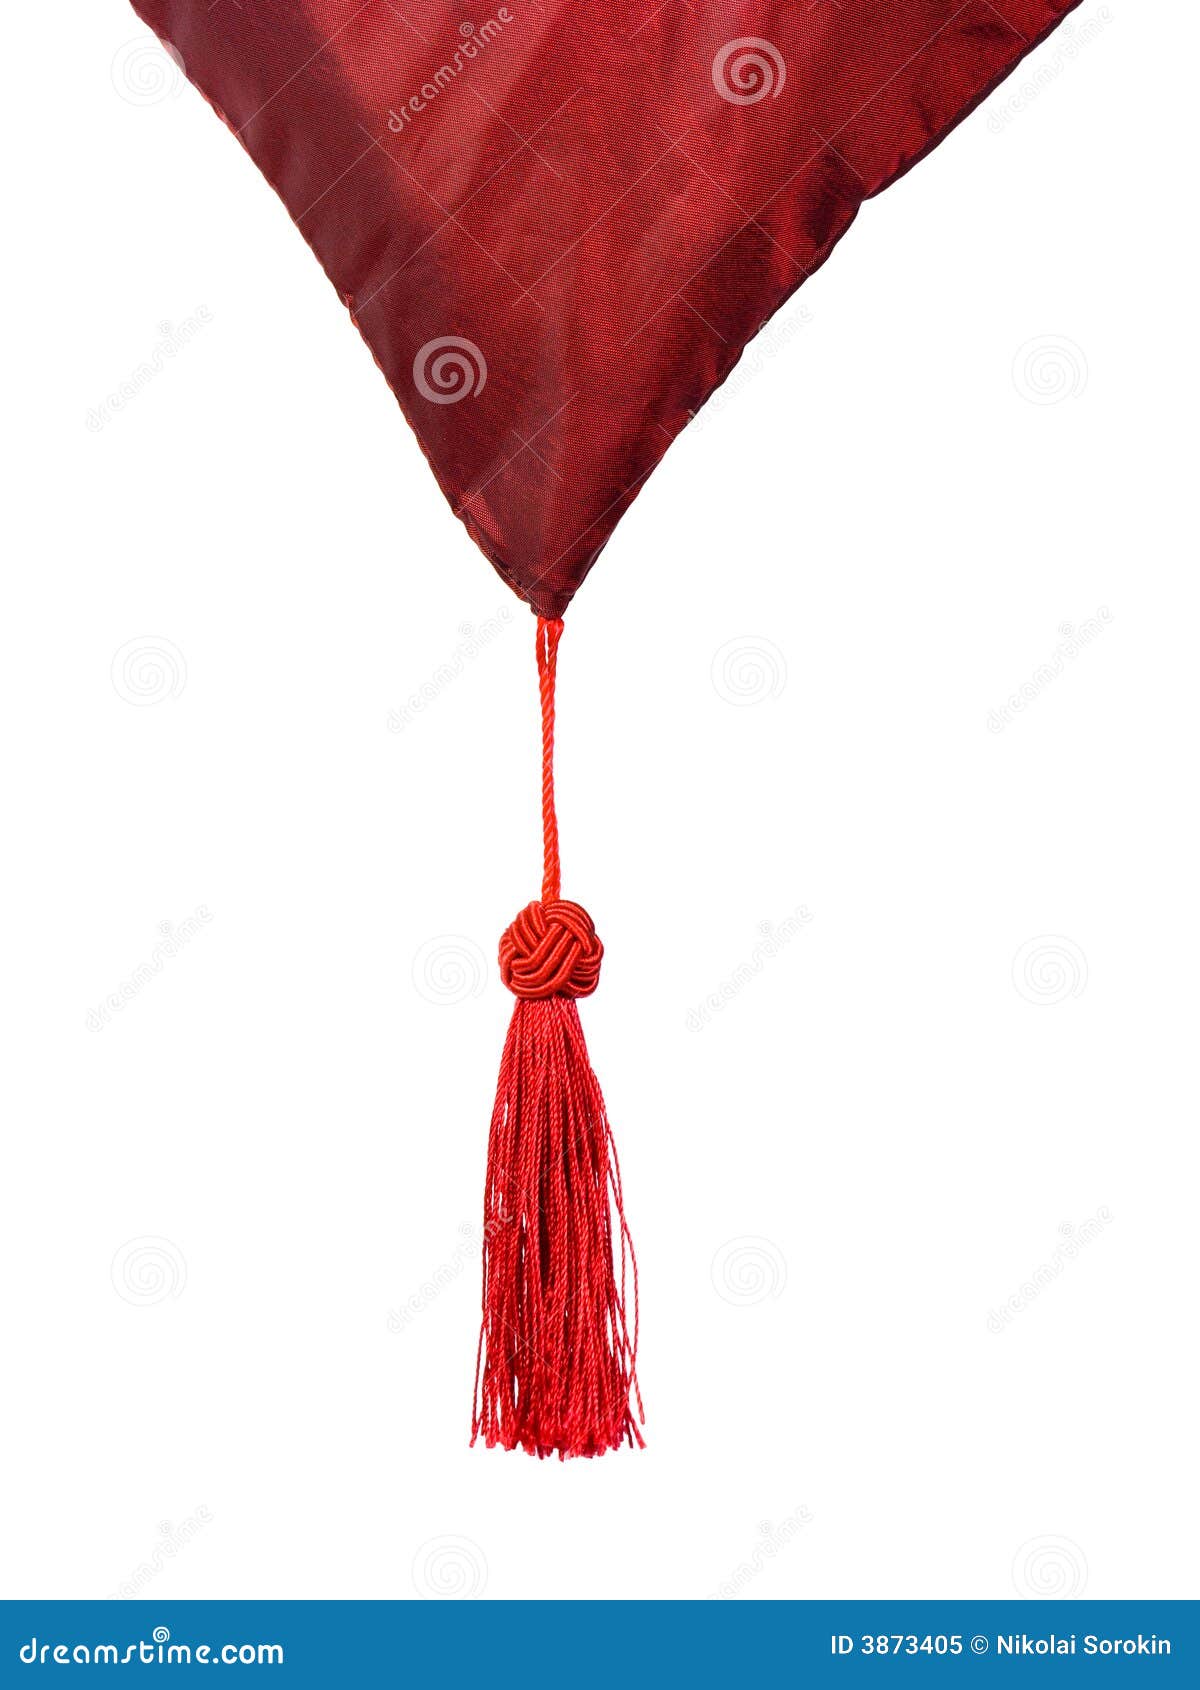 textile and tassel